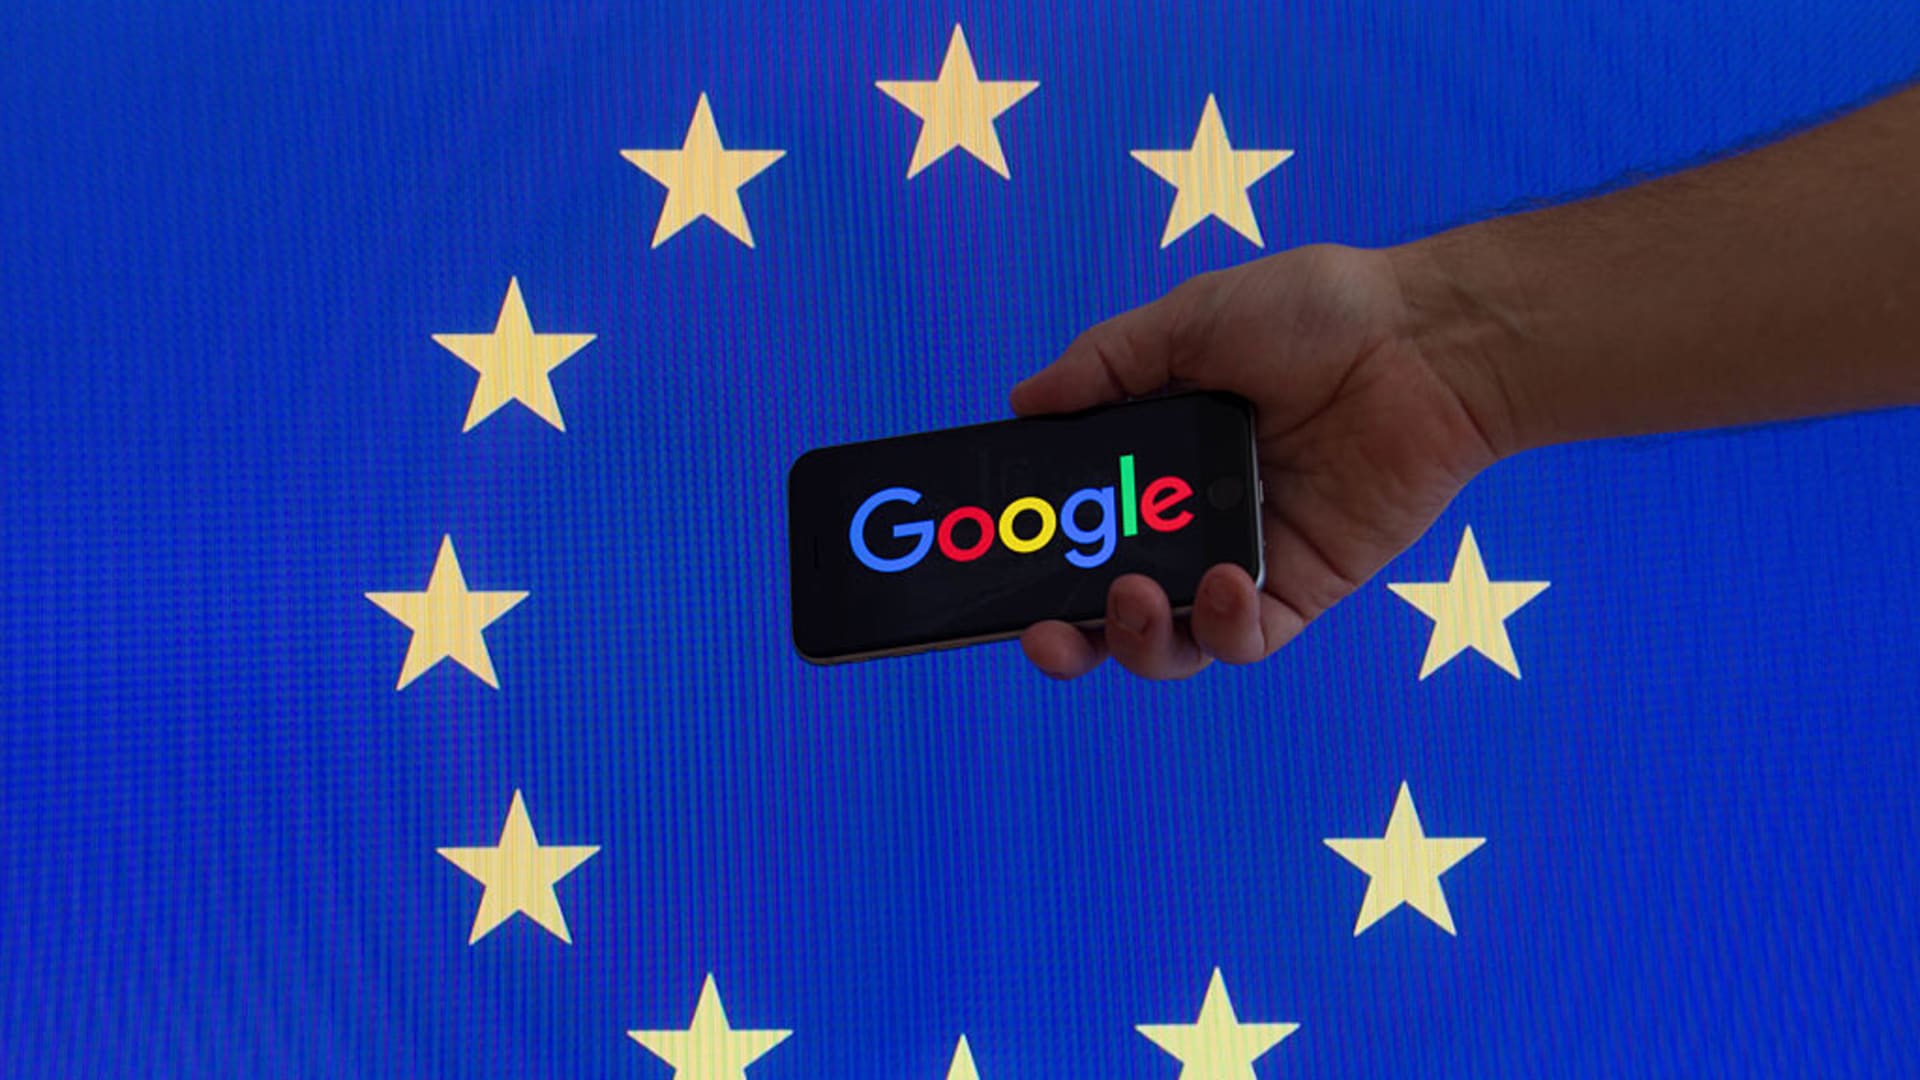 The European Court of Justice upholds the antitrust decision against Google, but reduces the fine